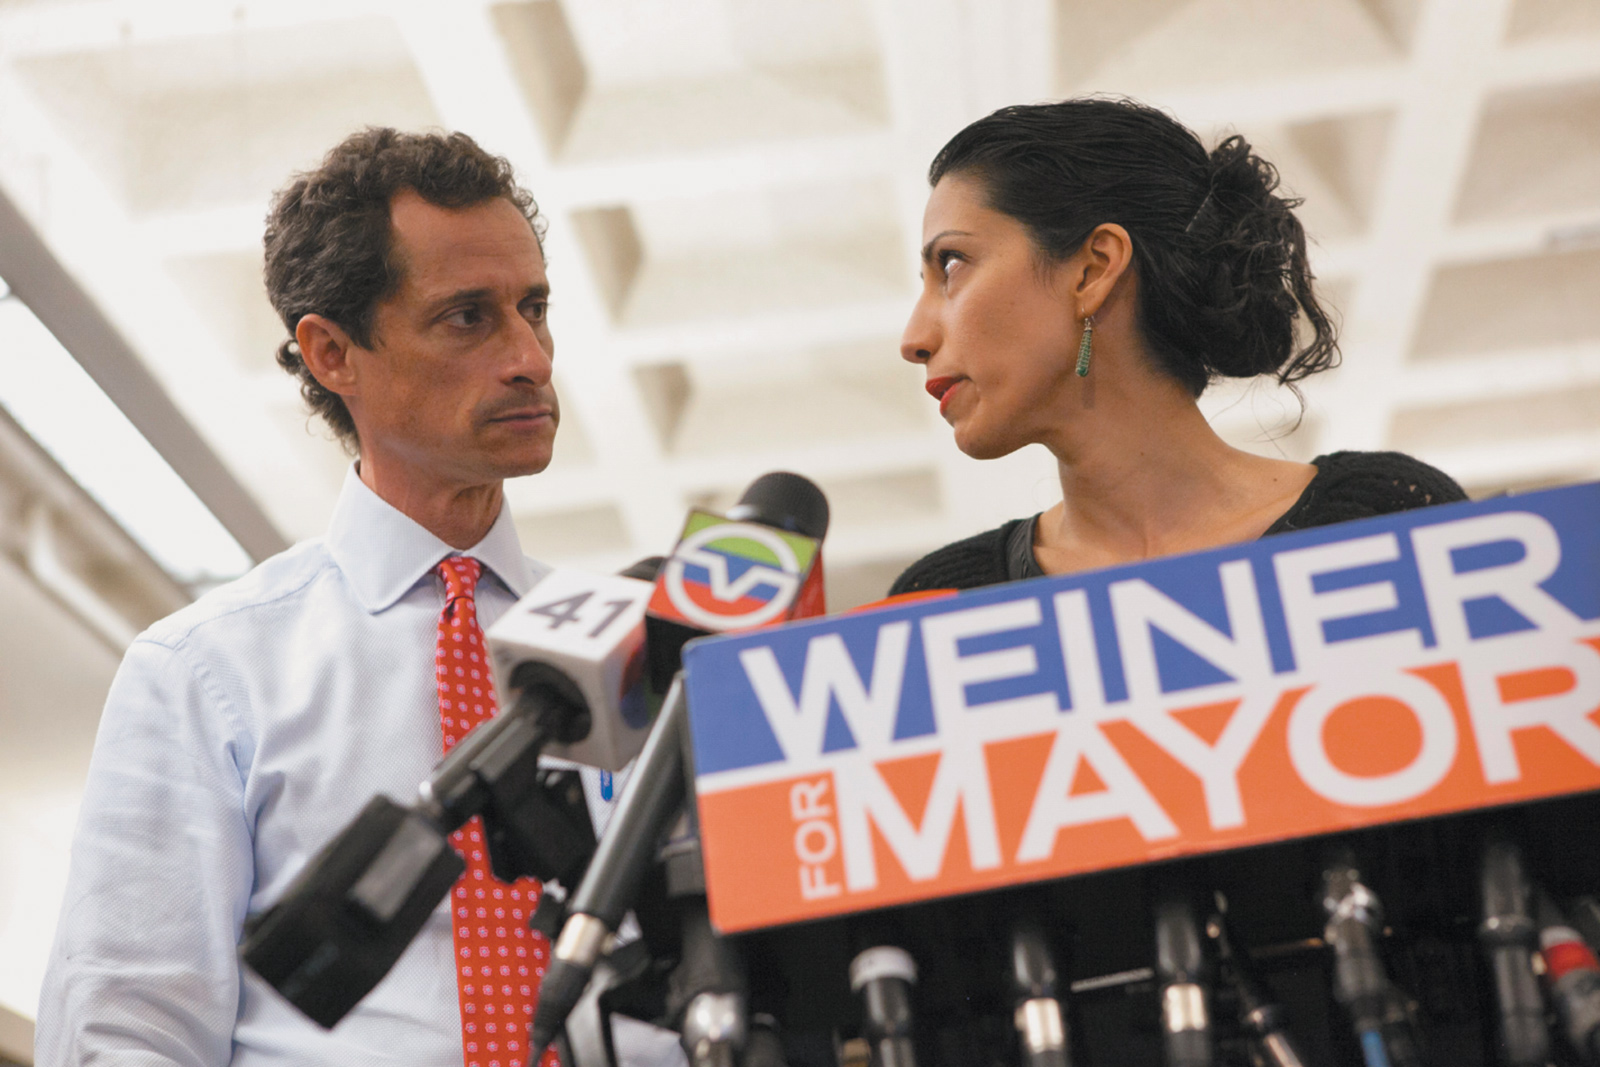 Anthony Weiner and Huma Abedin at the press conference announcing his intention to stay in New York’s mayoral race despite new revelations about his explicit text messages to women sent after a similar scandal in 2011 that had forced him to resign from Congress, New York City, July 23, 2013